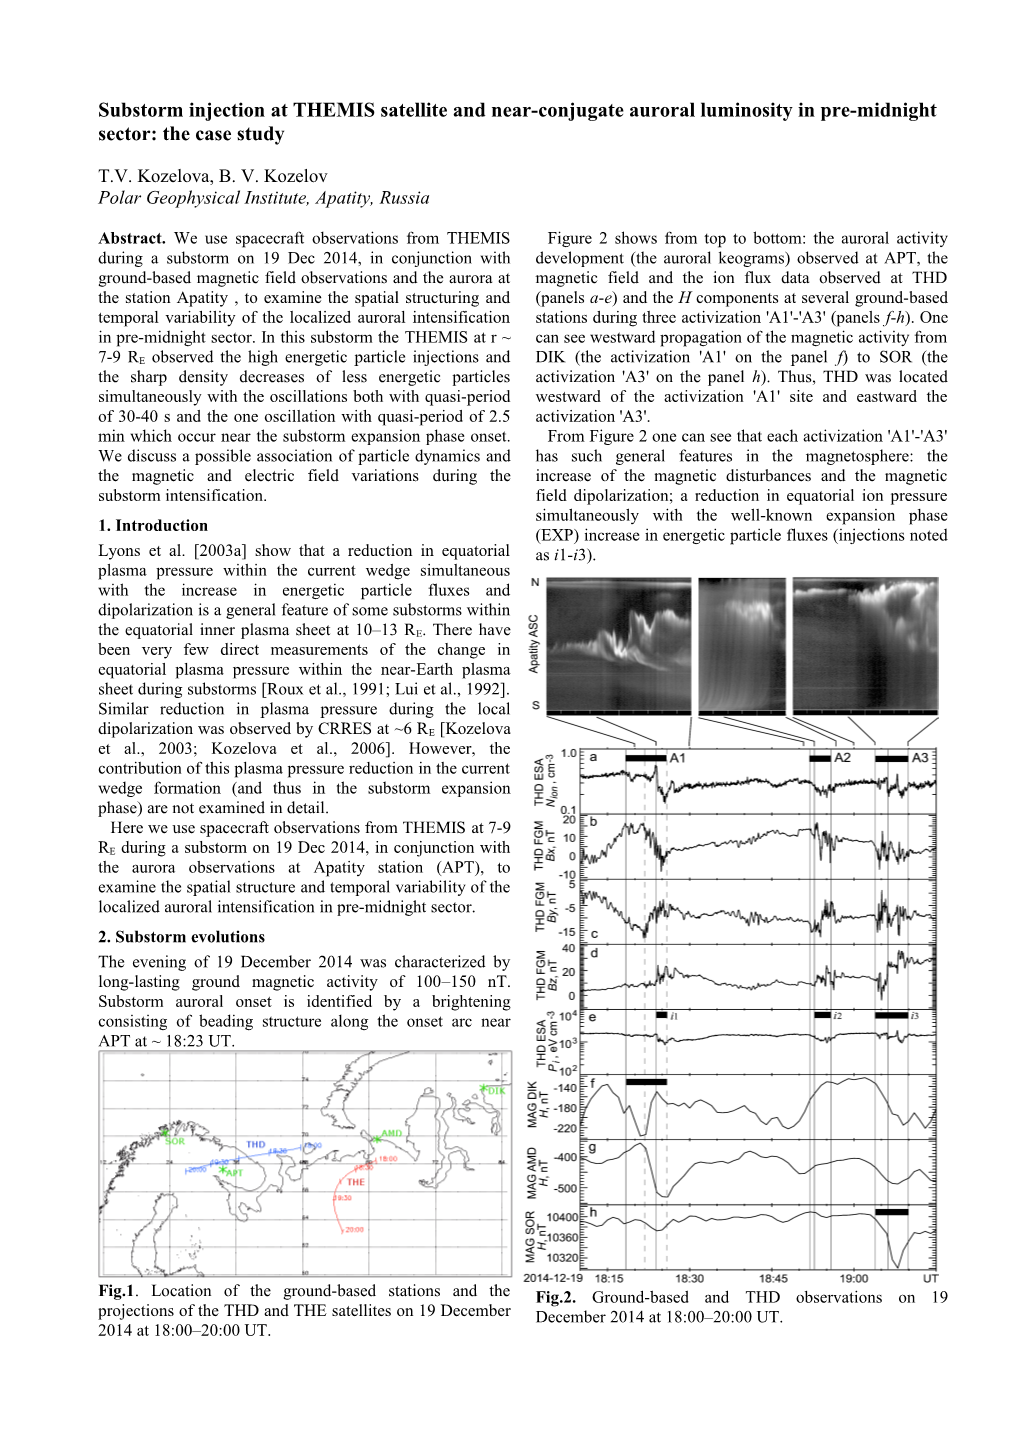 Substorm Injection at THEMIS Satellite and Near-Conjugate Auroral Luminosity in Pre-Midnight